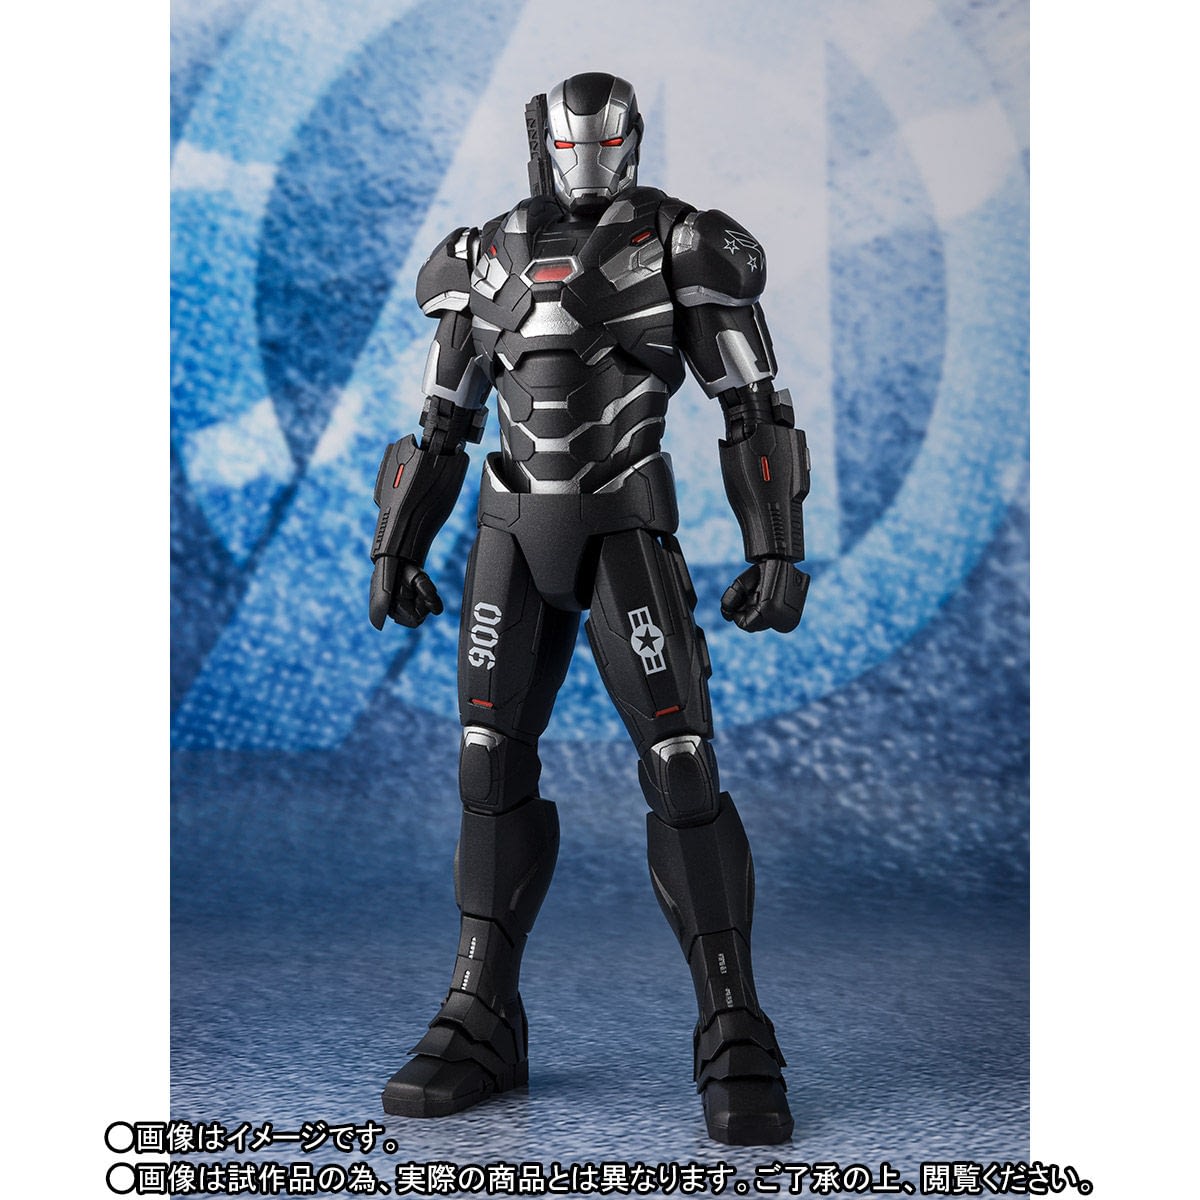 War Machine Joins The Endgame With New Sh Figuarts Figure